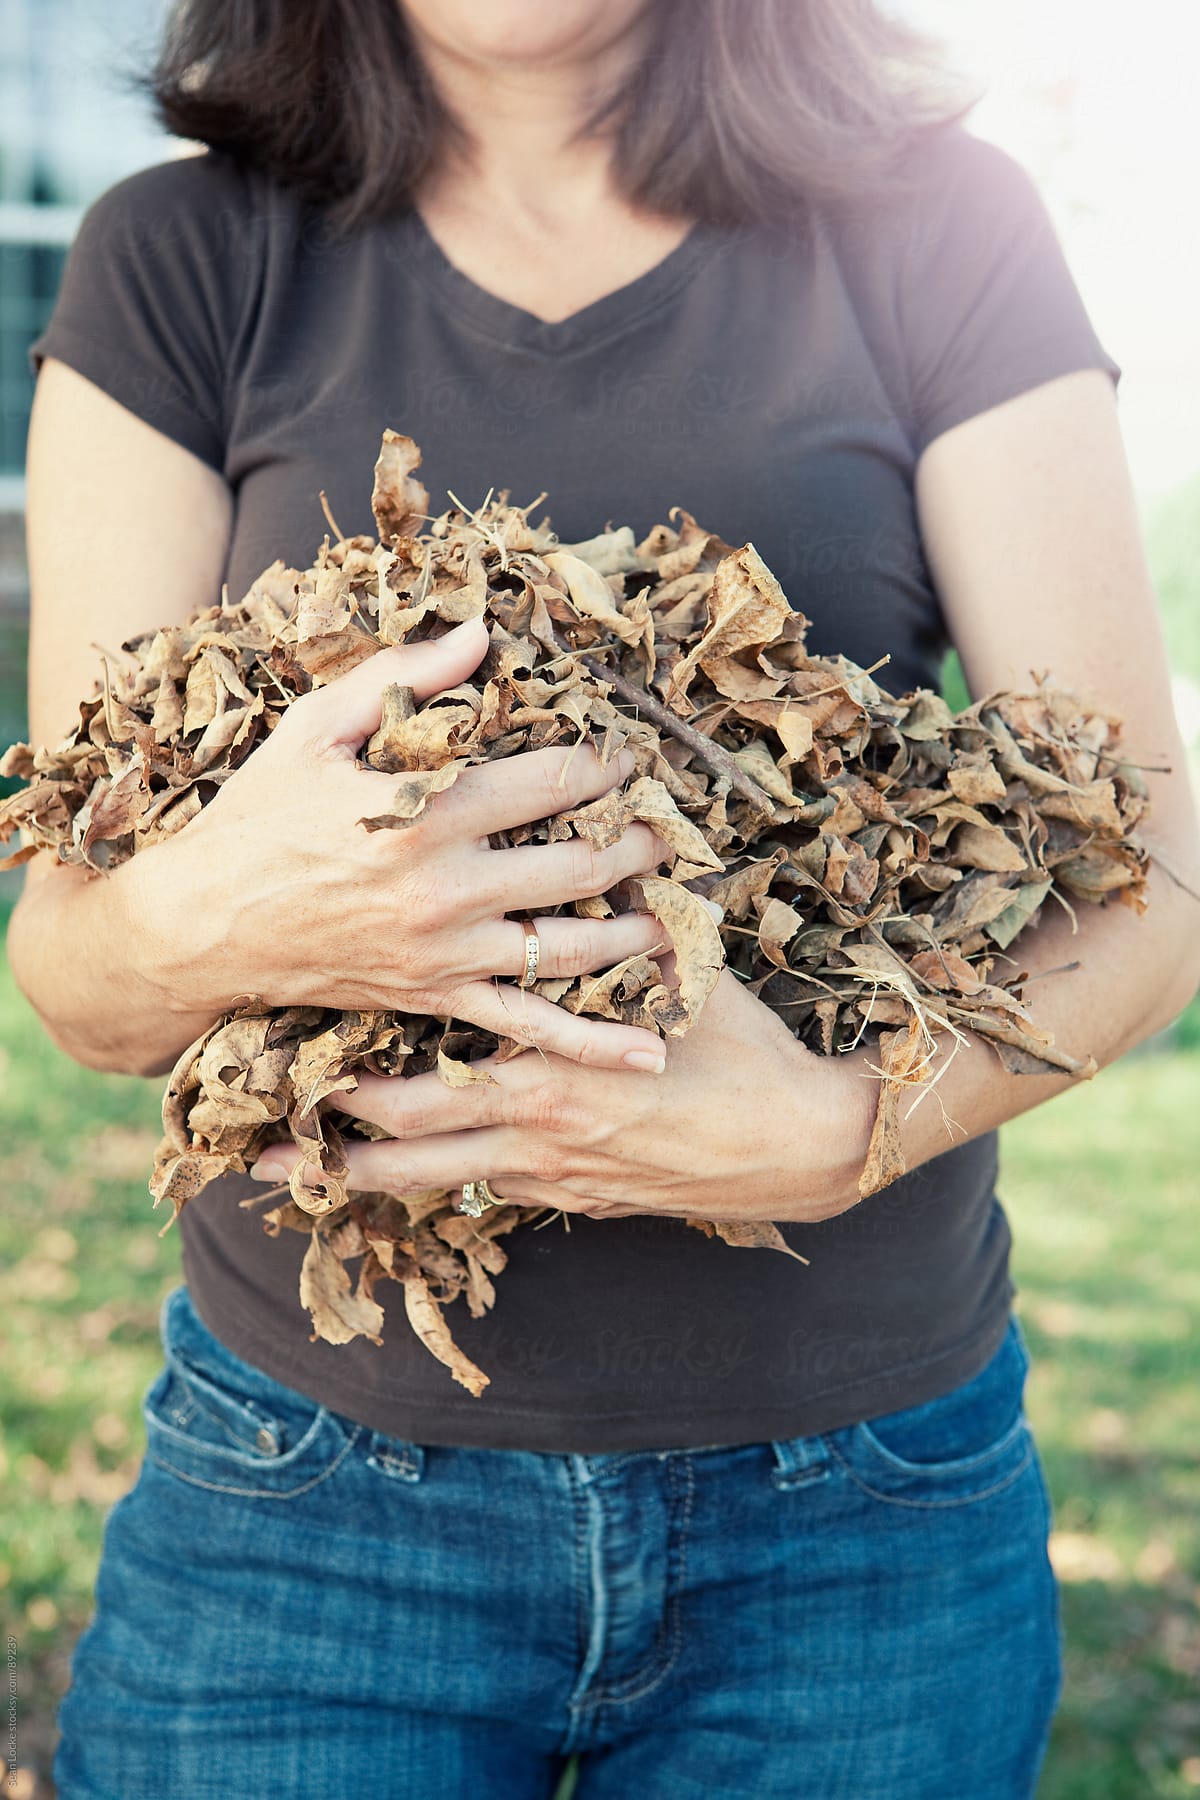 Autumn: Woman Holding Pile of Leaves